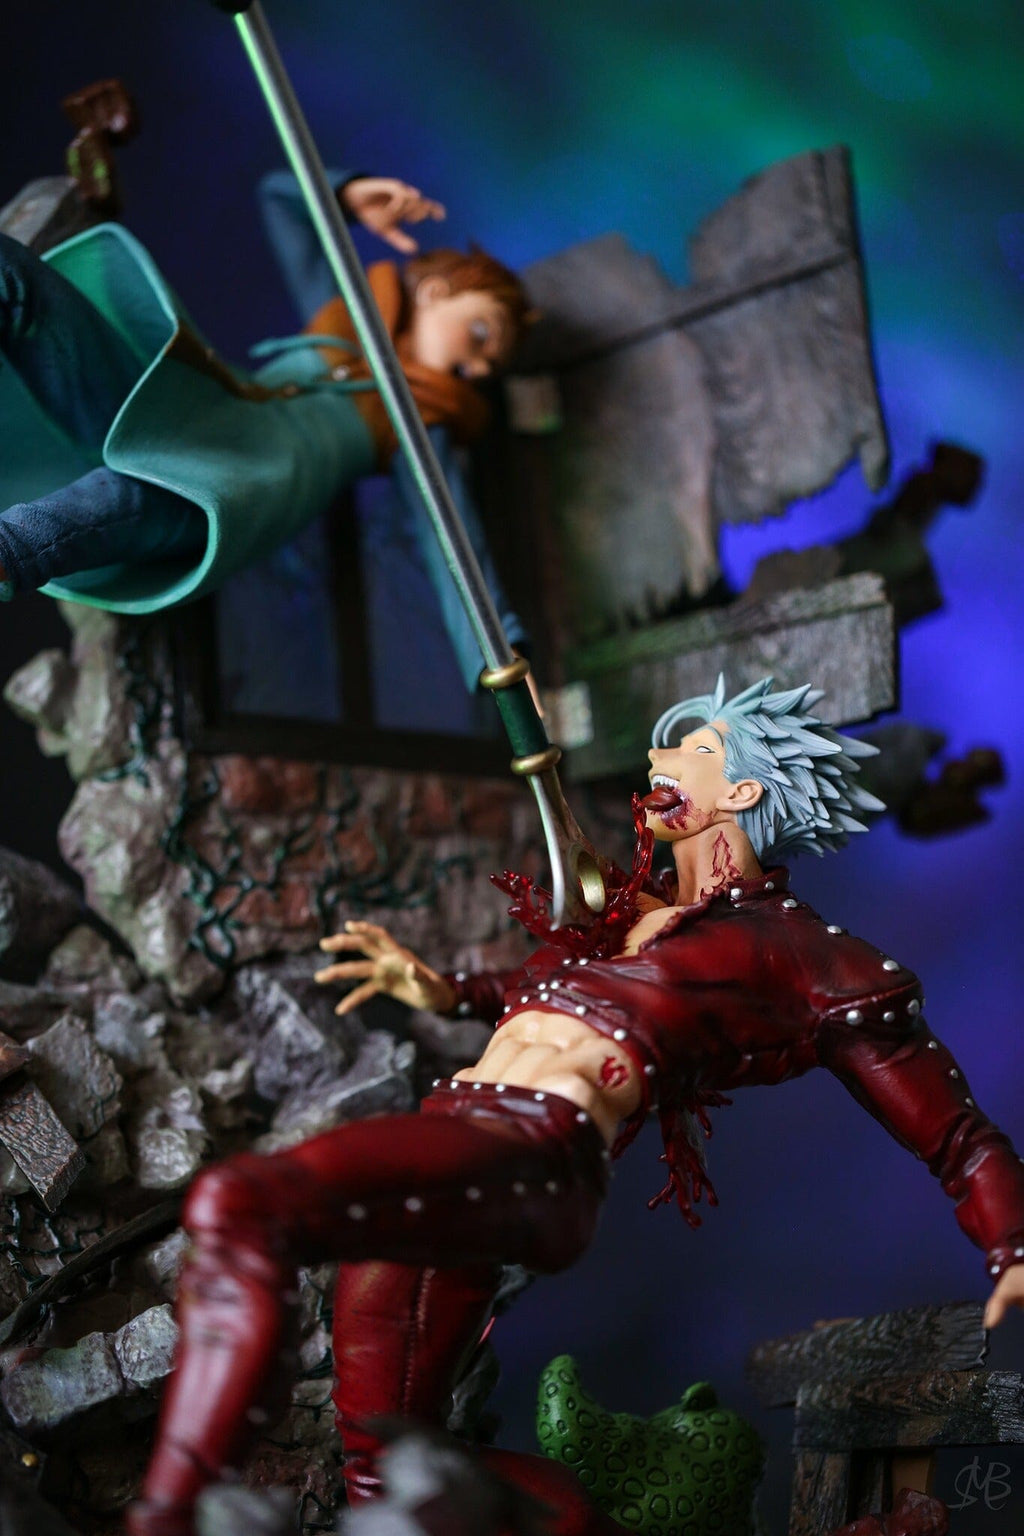 Alucard Of Hellsing Ultimate - Figurama Collectors For General Trading Co.  / Limited Liability Company